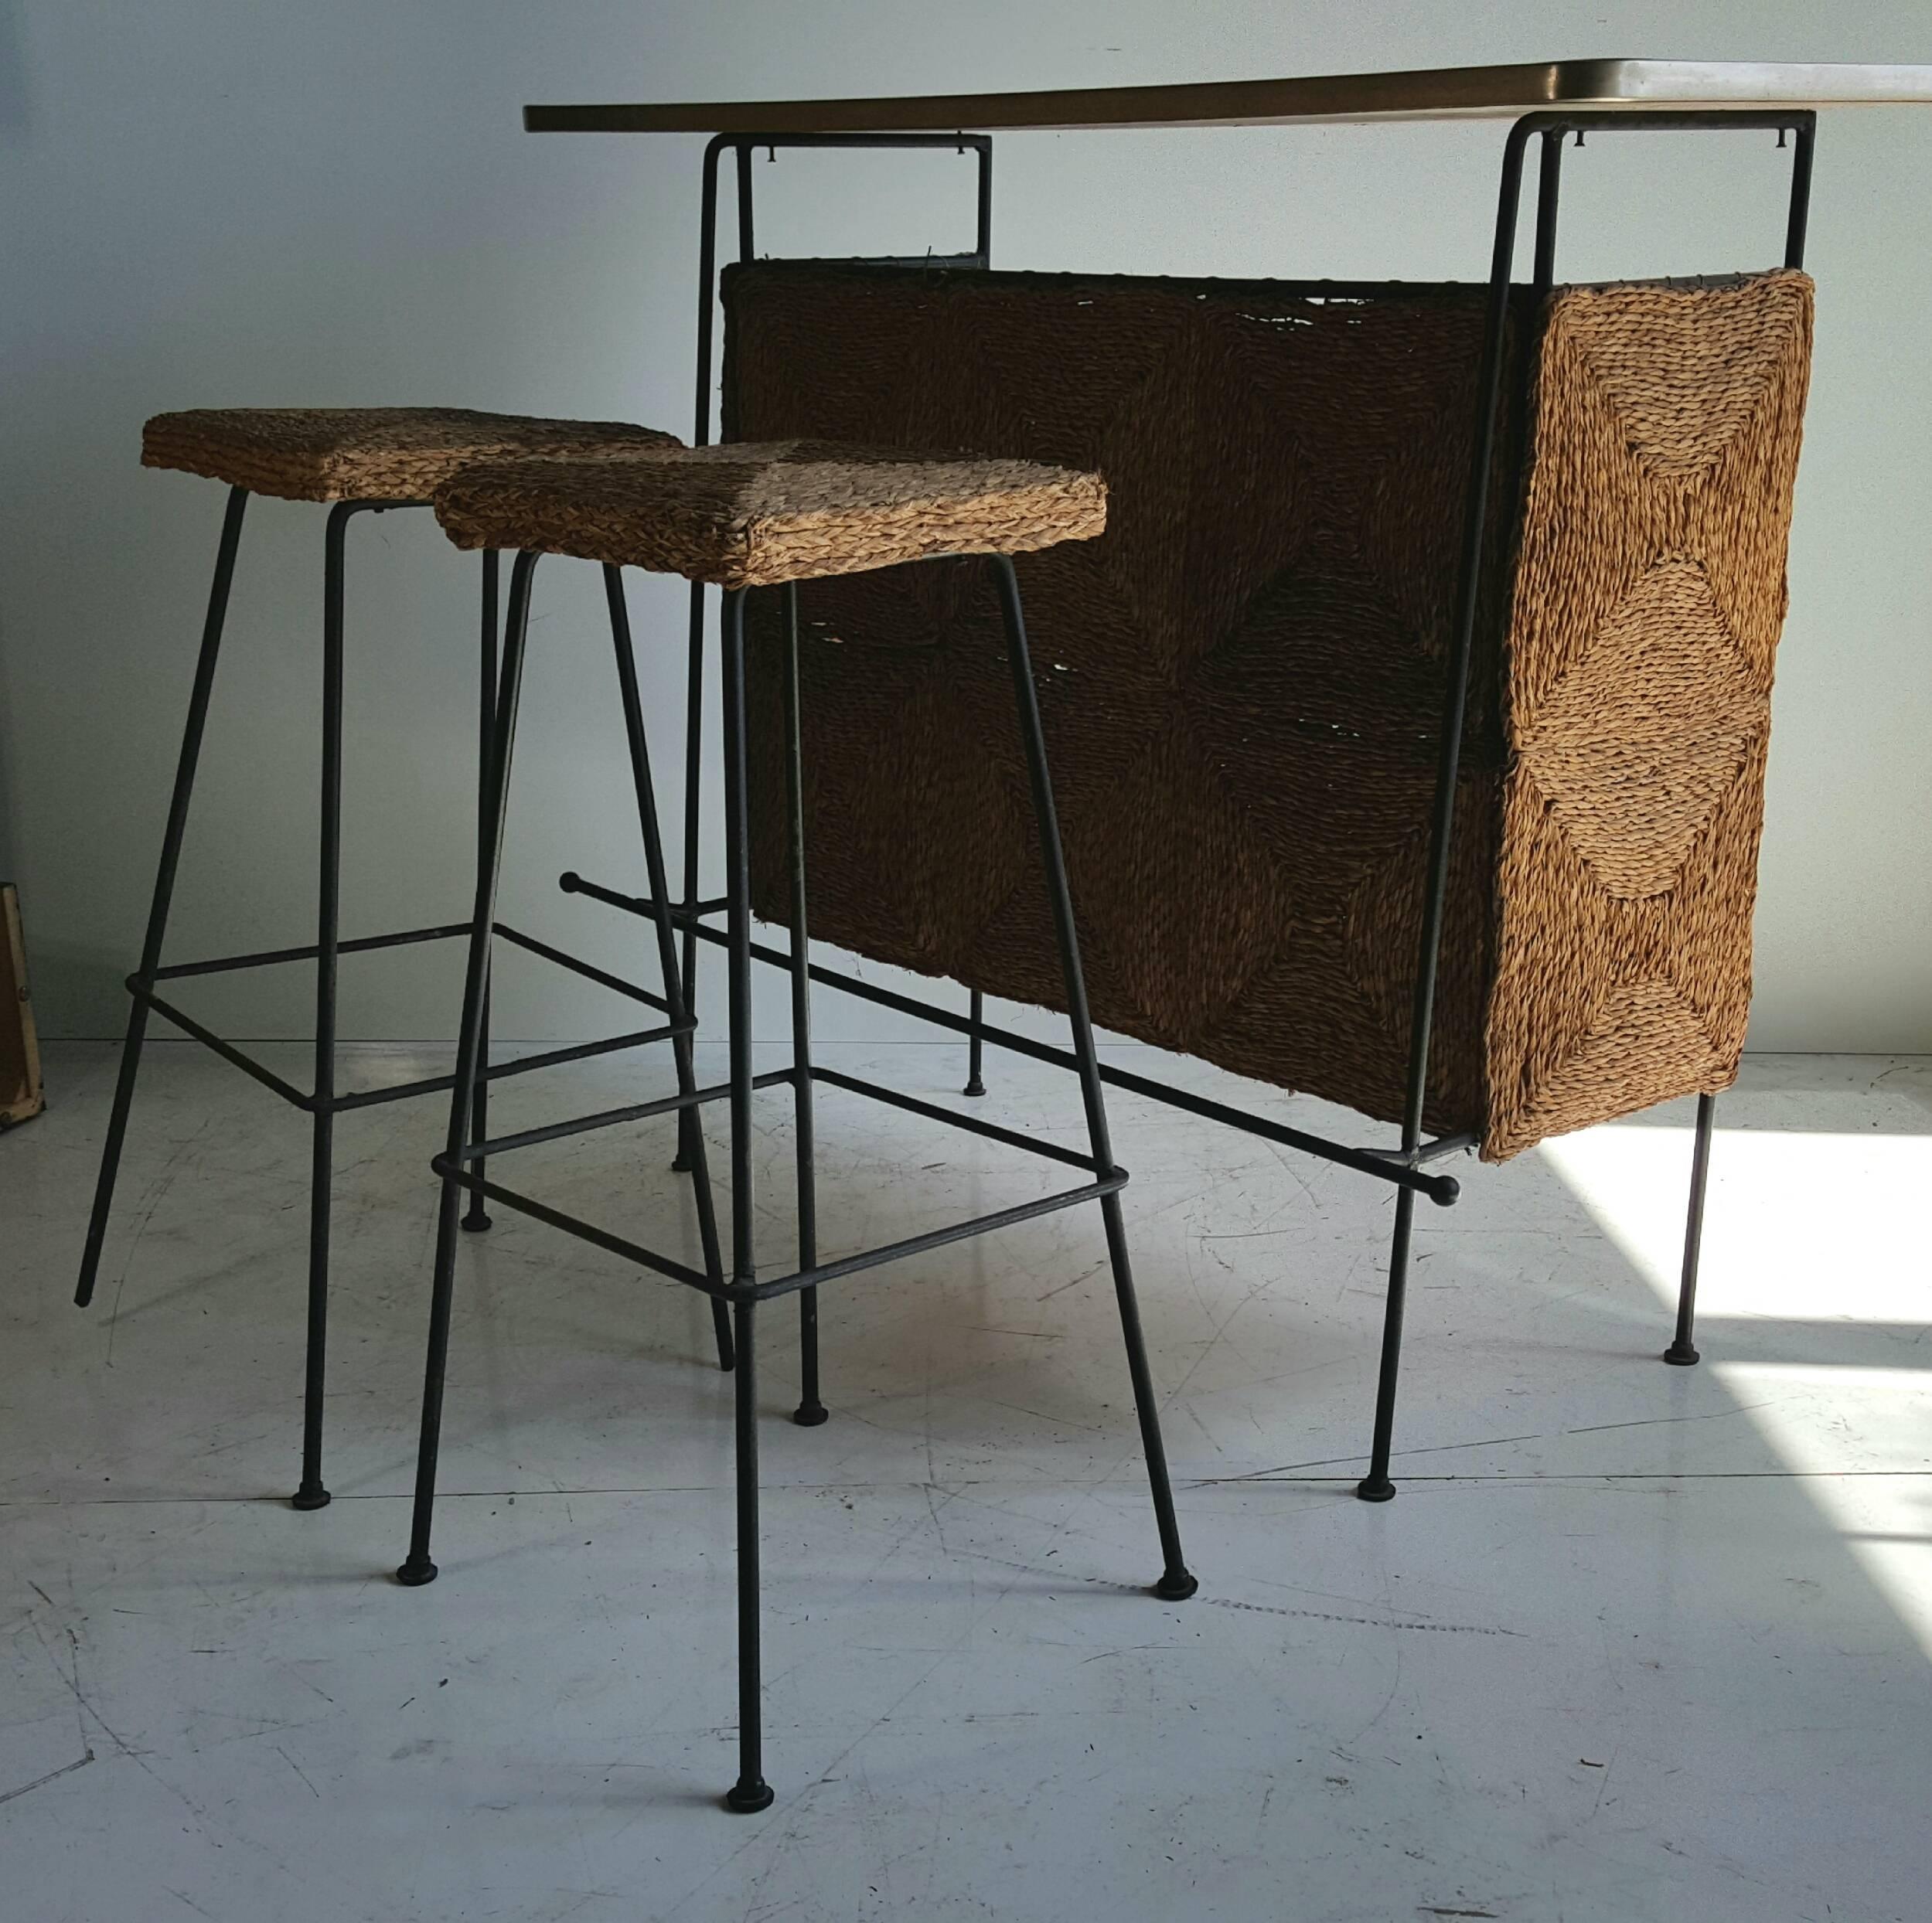 Classic Mid-Century Modern bar/stools designed by Arthur Umanoff, iron and laminate construction as well as natural fiber weaved panels and slat wood shelves, included two original iron and natural fiber bar stools, (one stool missing feet caps)